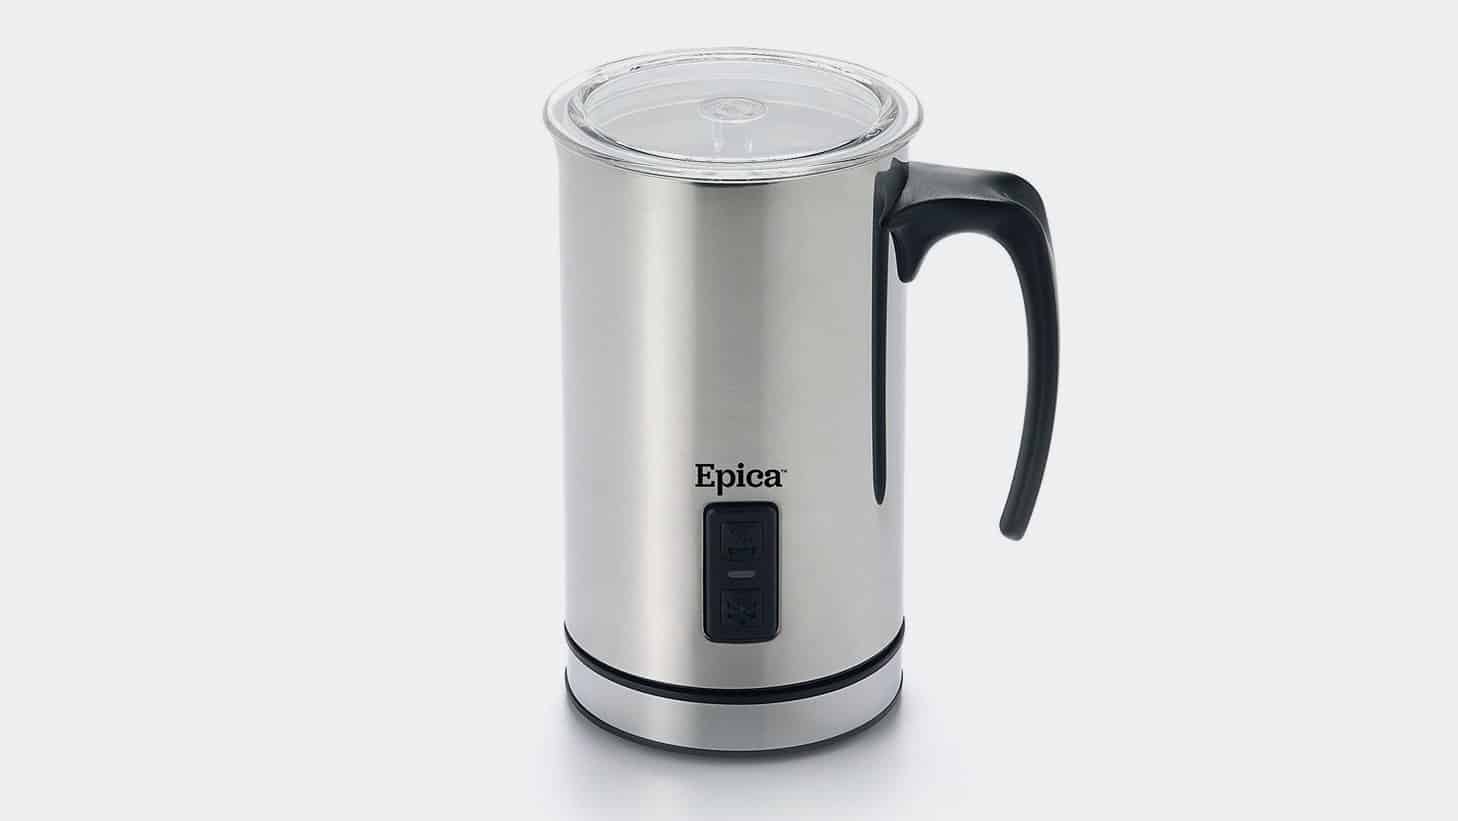 Epica Automatic Electric Milk Frother And Heater Carafe